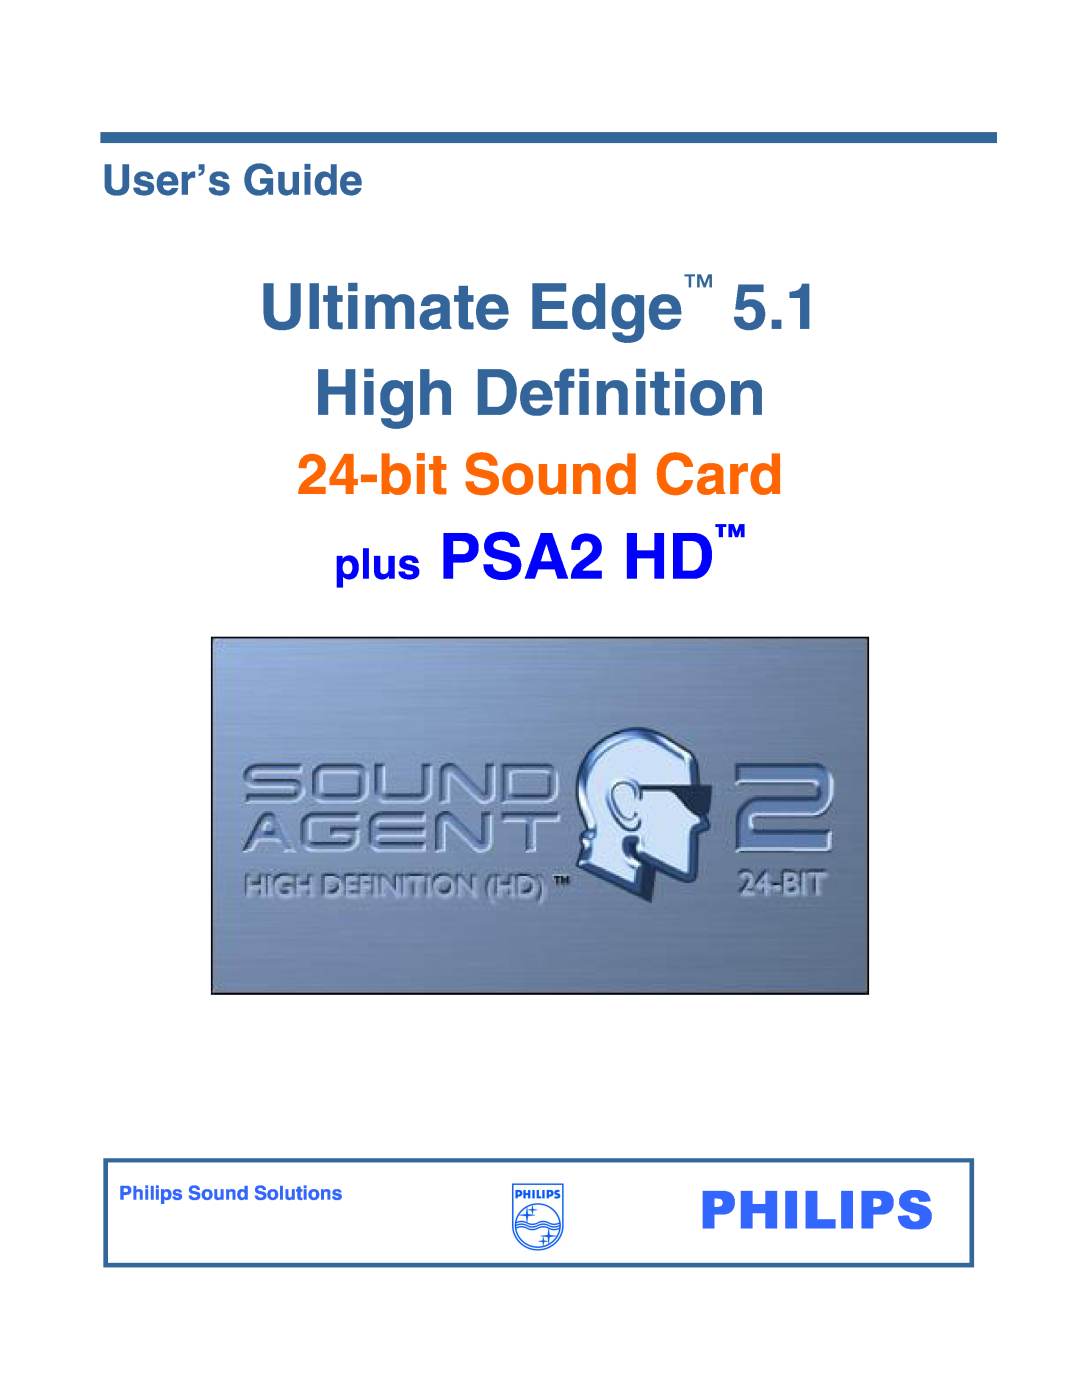 Philips 5.1 manual Ultimate Edge High Definition, plus PSA2 HD, bit Sound Card, Philips, User’s Guide 